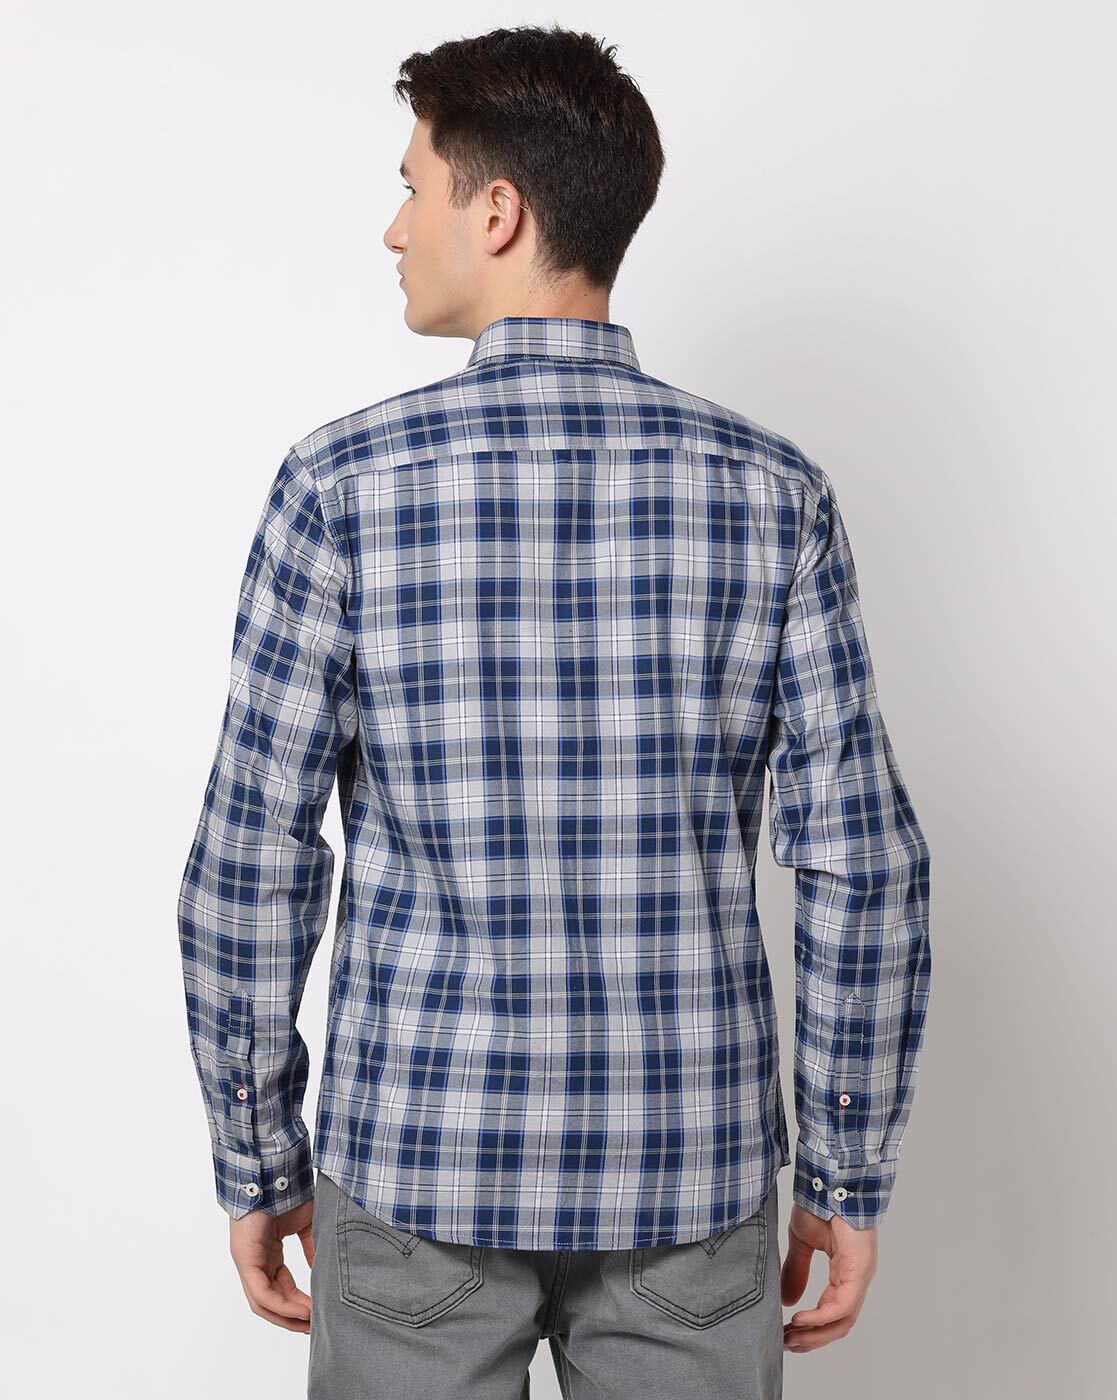 Buy Plaid: Black, Blue and Red Men Relaxed Shirts Online